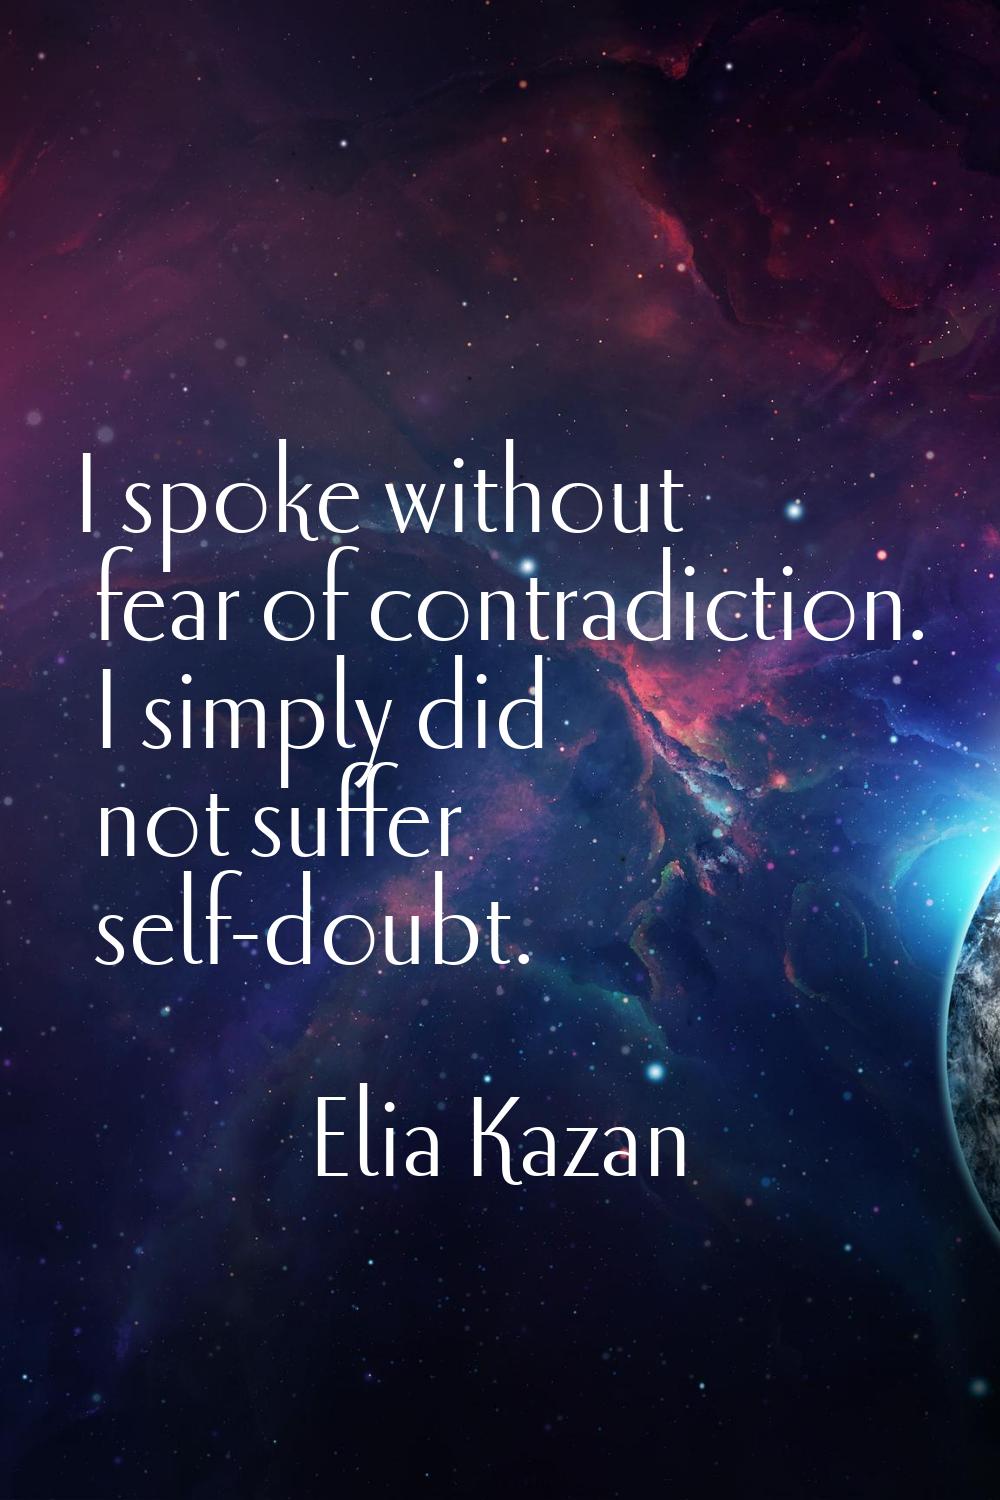 I spoke without fear of contradiction. I simply did not suffer self-doubt.